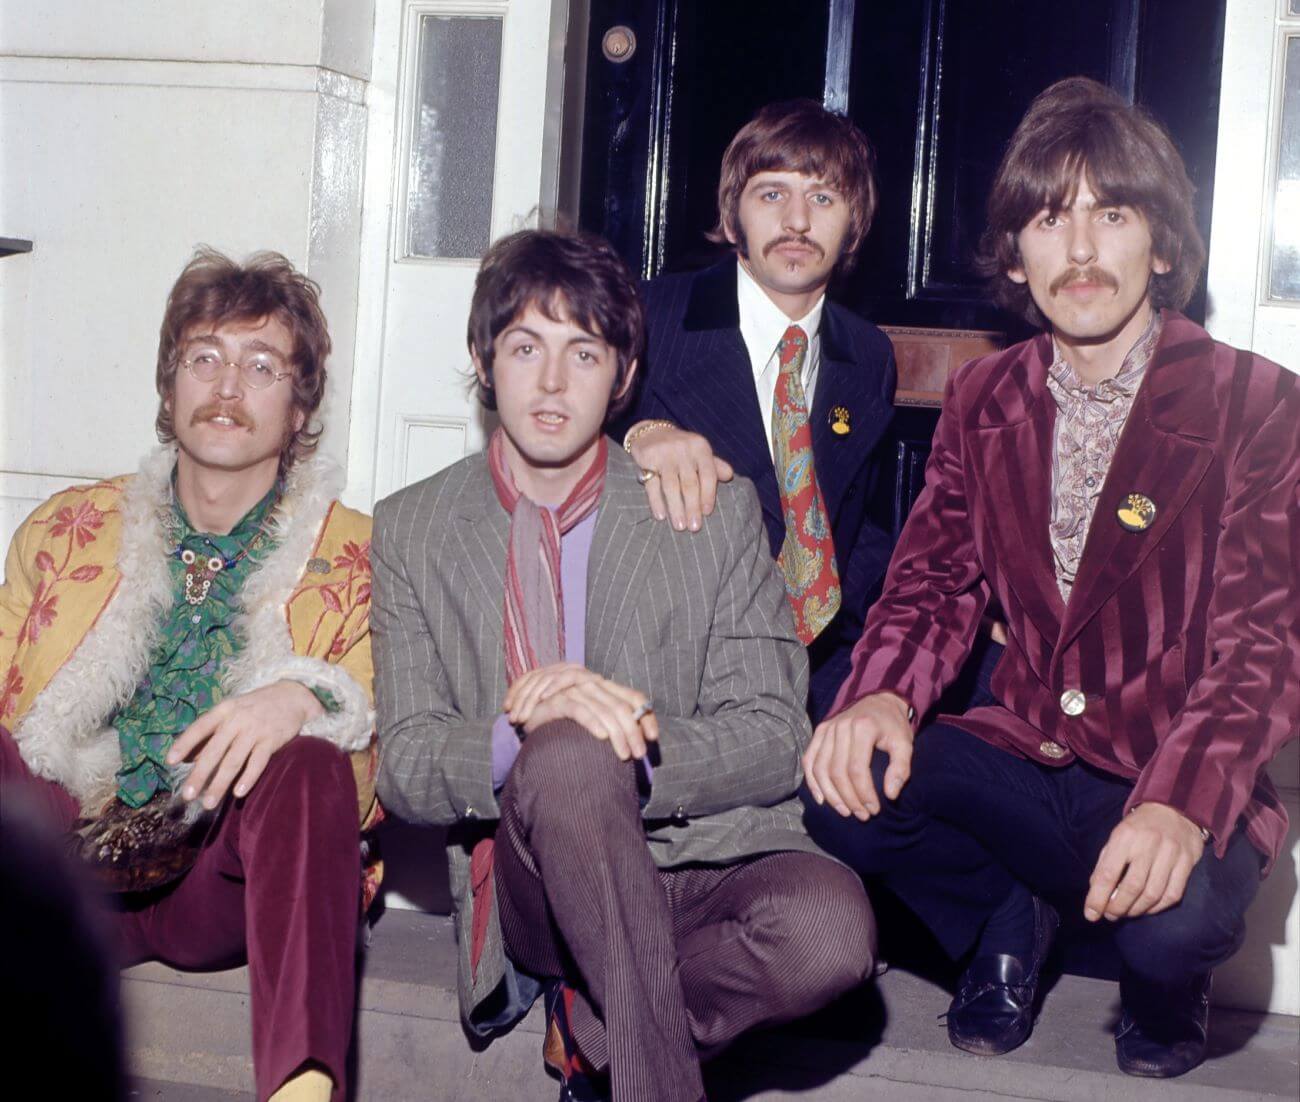 The Beatles sit on a doorstep together.